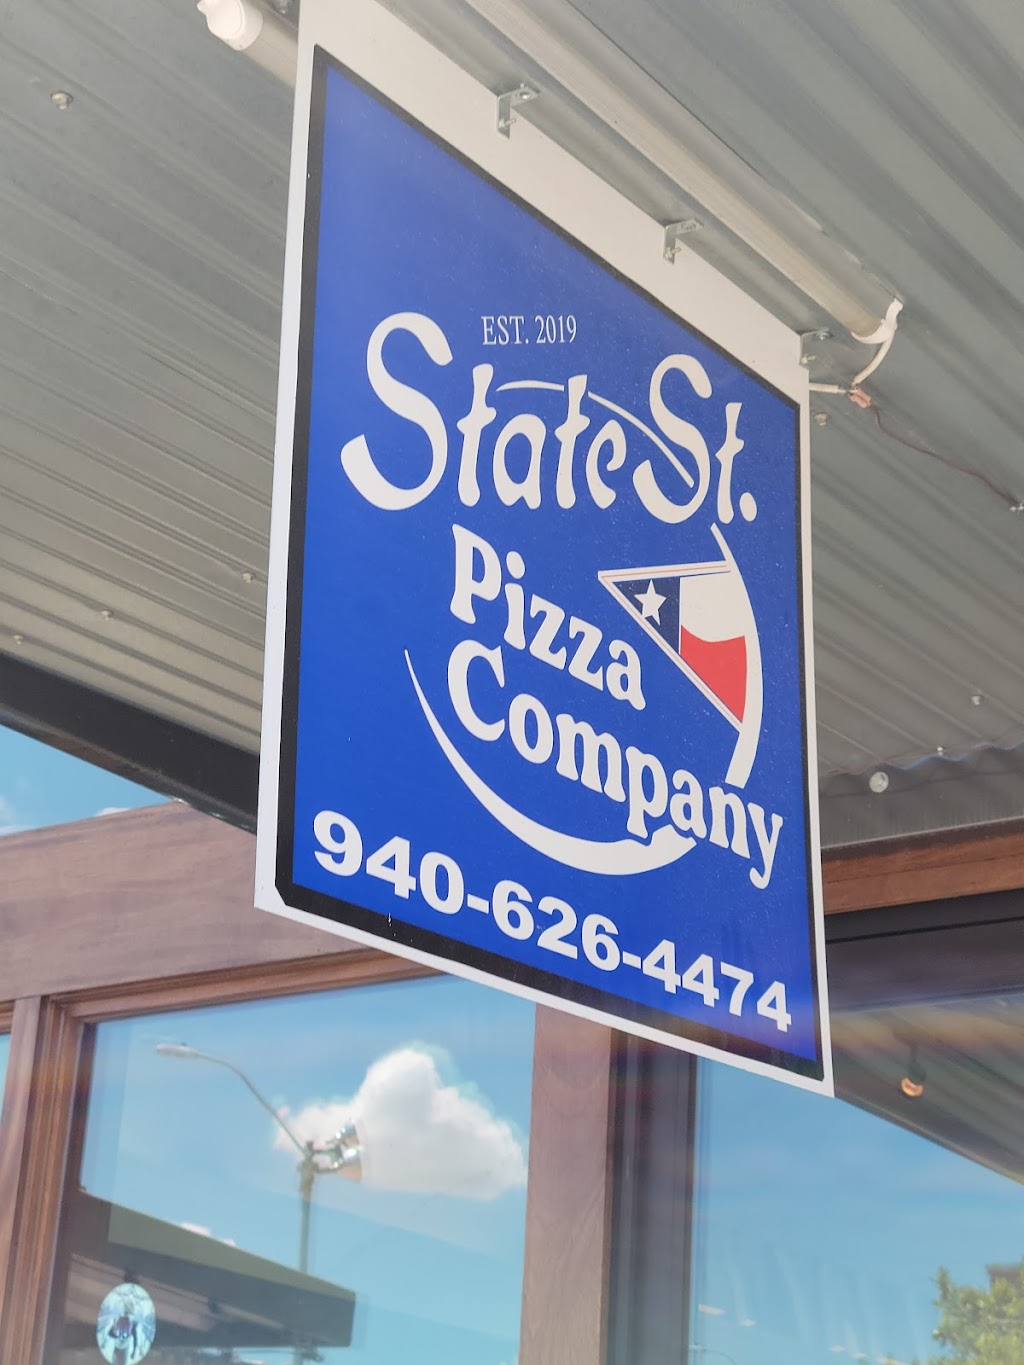 State Street Pizza Company | 113 N State St, Decatur, TX 76234 | Phone: (940) 626-4474